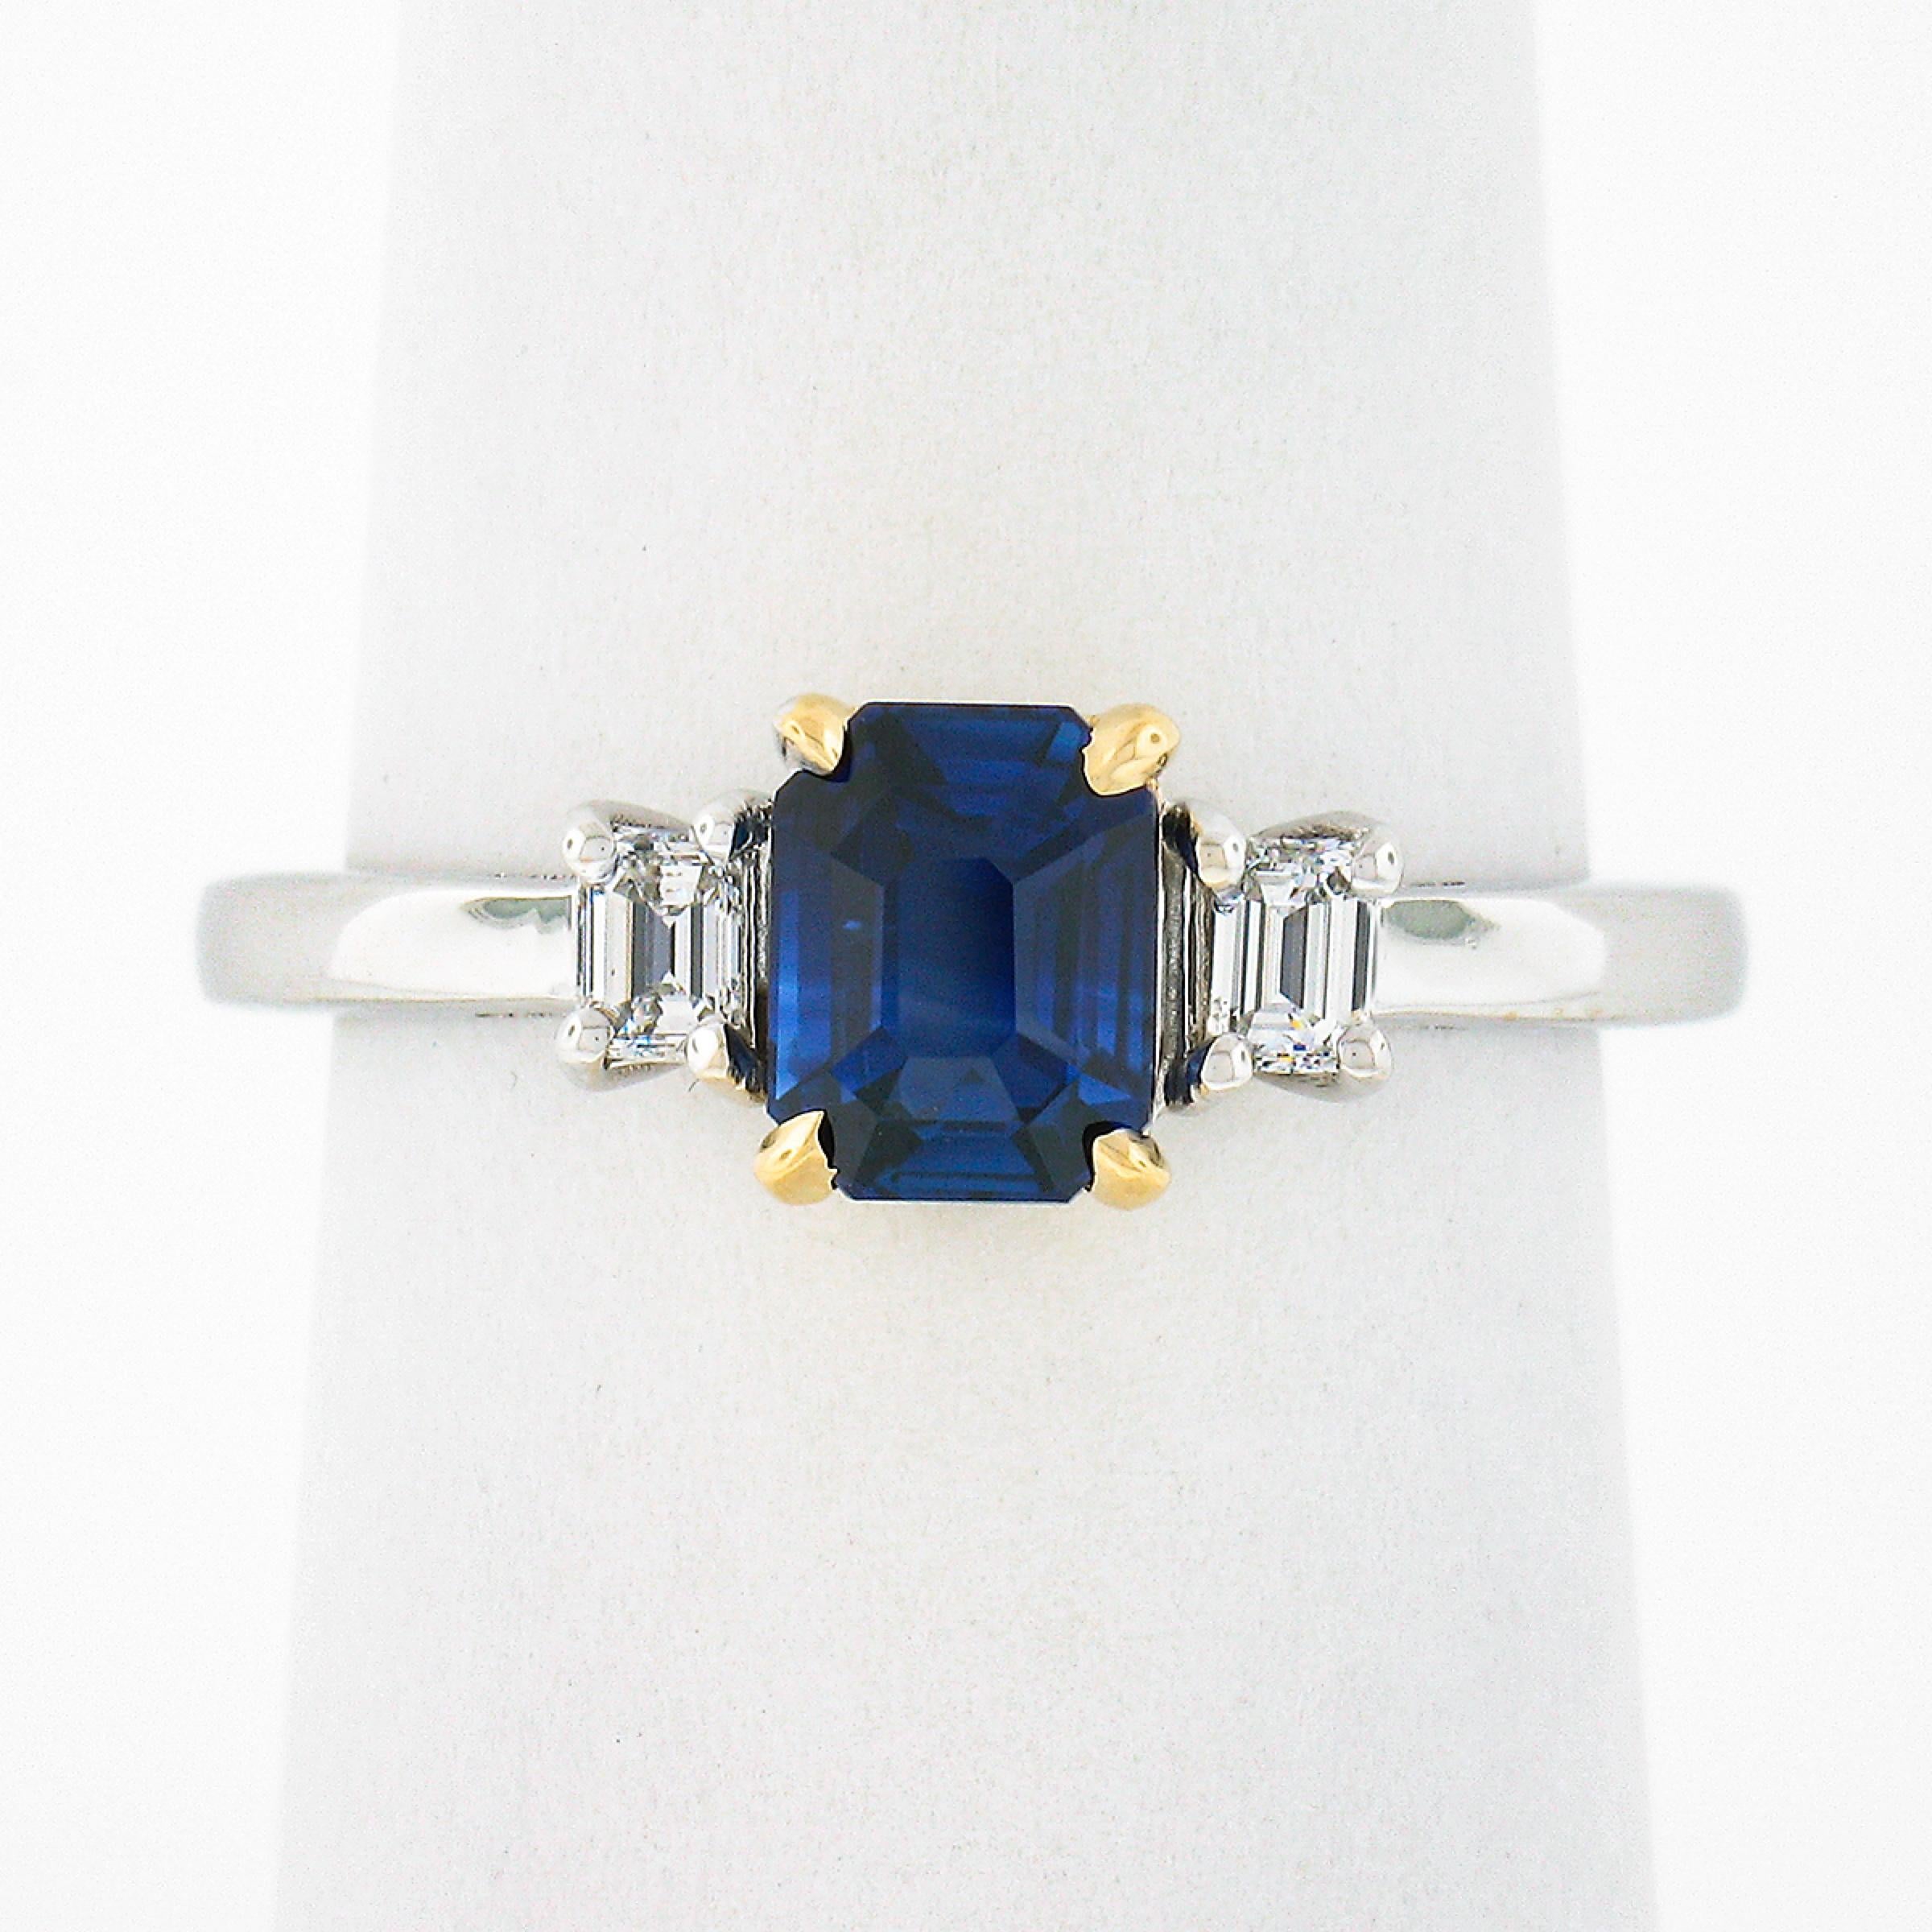 This very elegant sapphire and diamond three stone engagement ring is newly crafted in solid 18k white & yellow gold. It features a gorgeous GIA certified, 1.19 carat emerald cut sapphire solitaire, prong set in the center yellow gold basket and